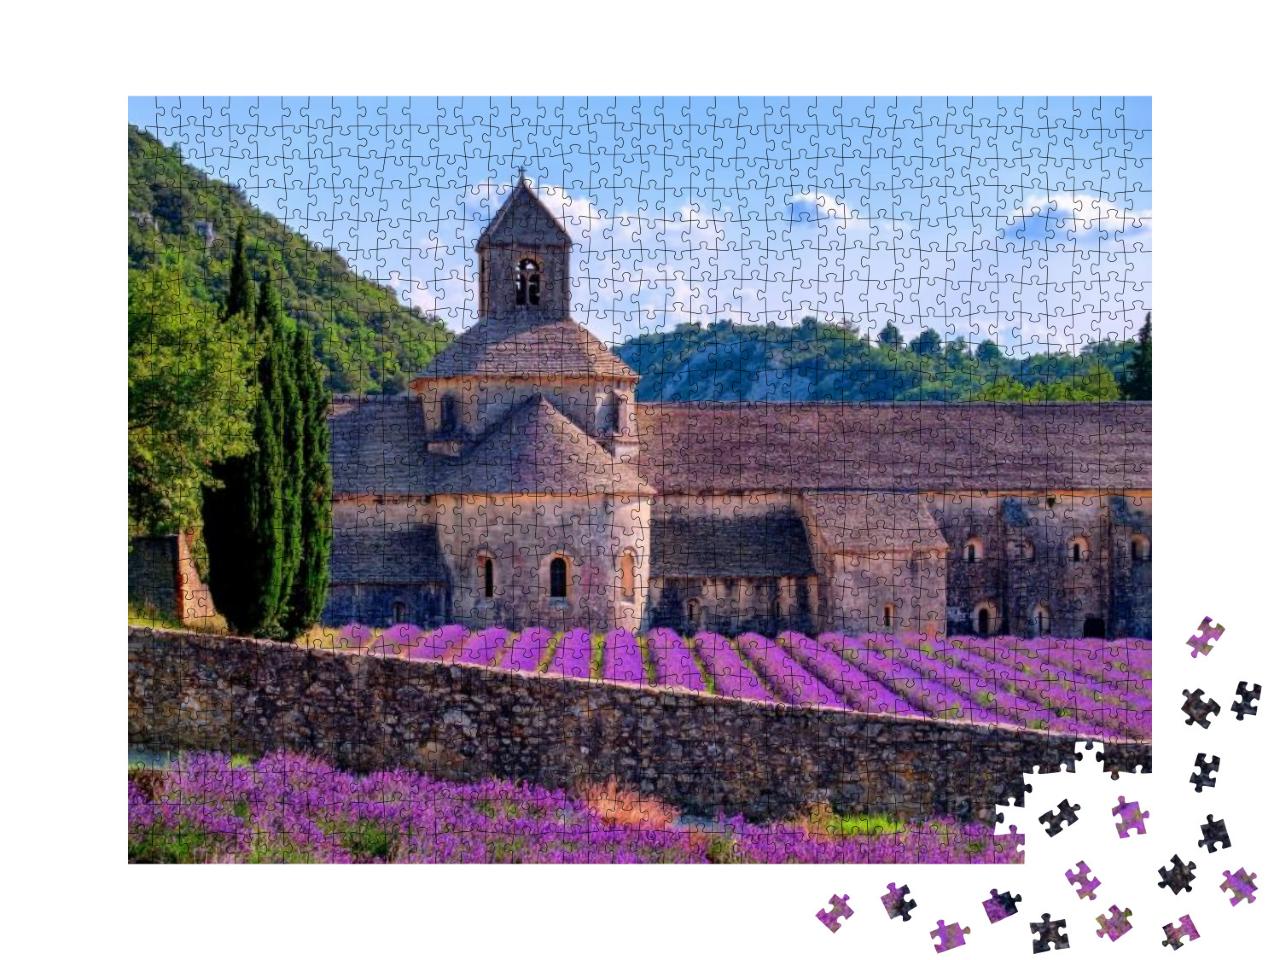 Blooming Purple Lavender Fields At Senanque Monastery, Pr... Jigsaw Puzzle with 1000 pieces